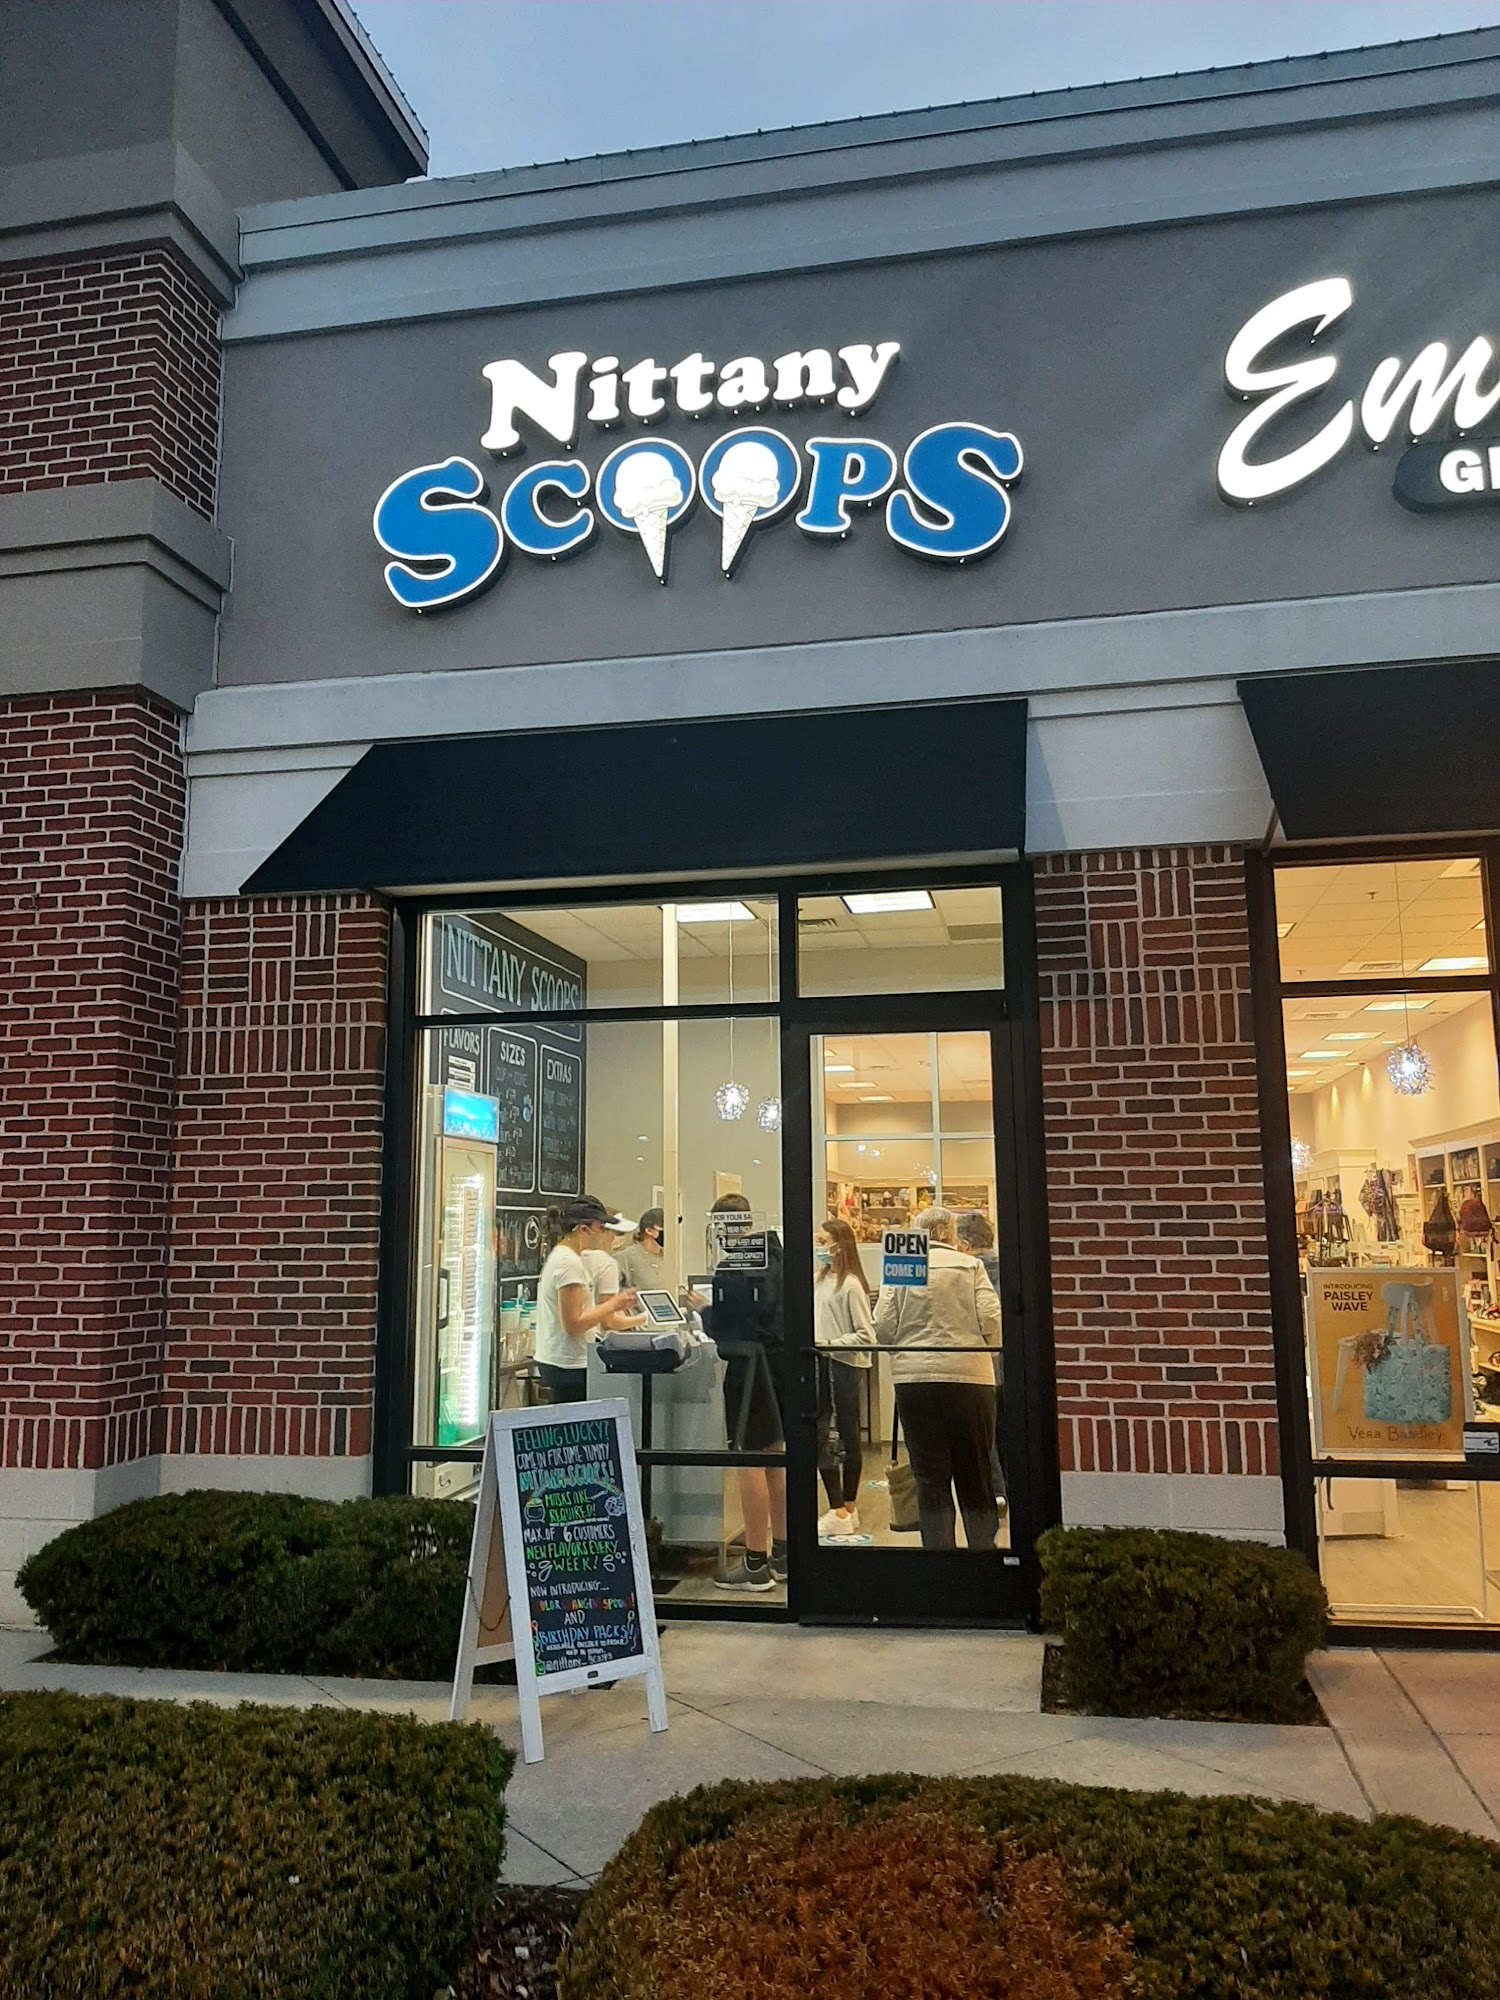 Nittany Scoops